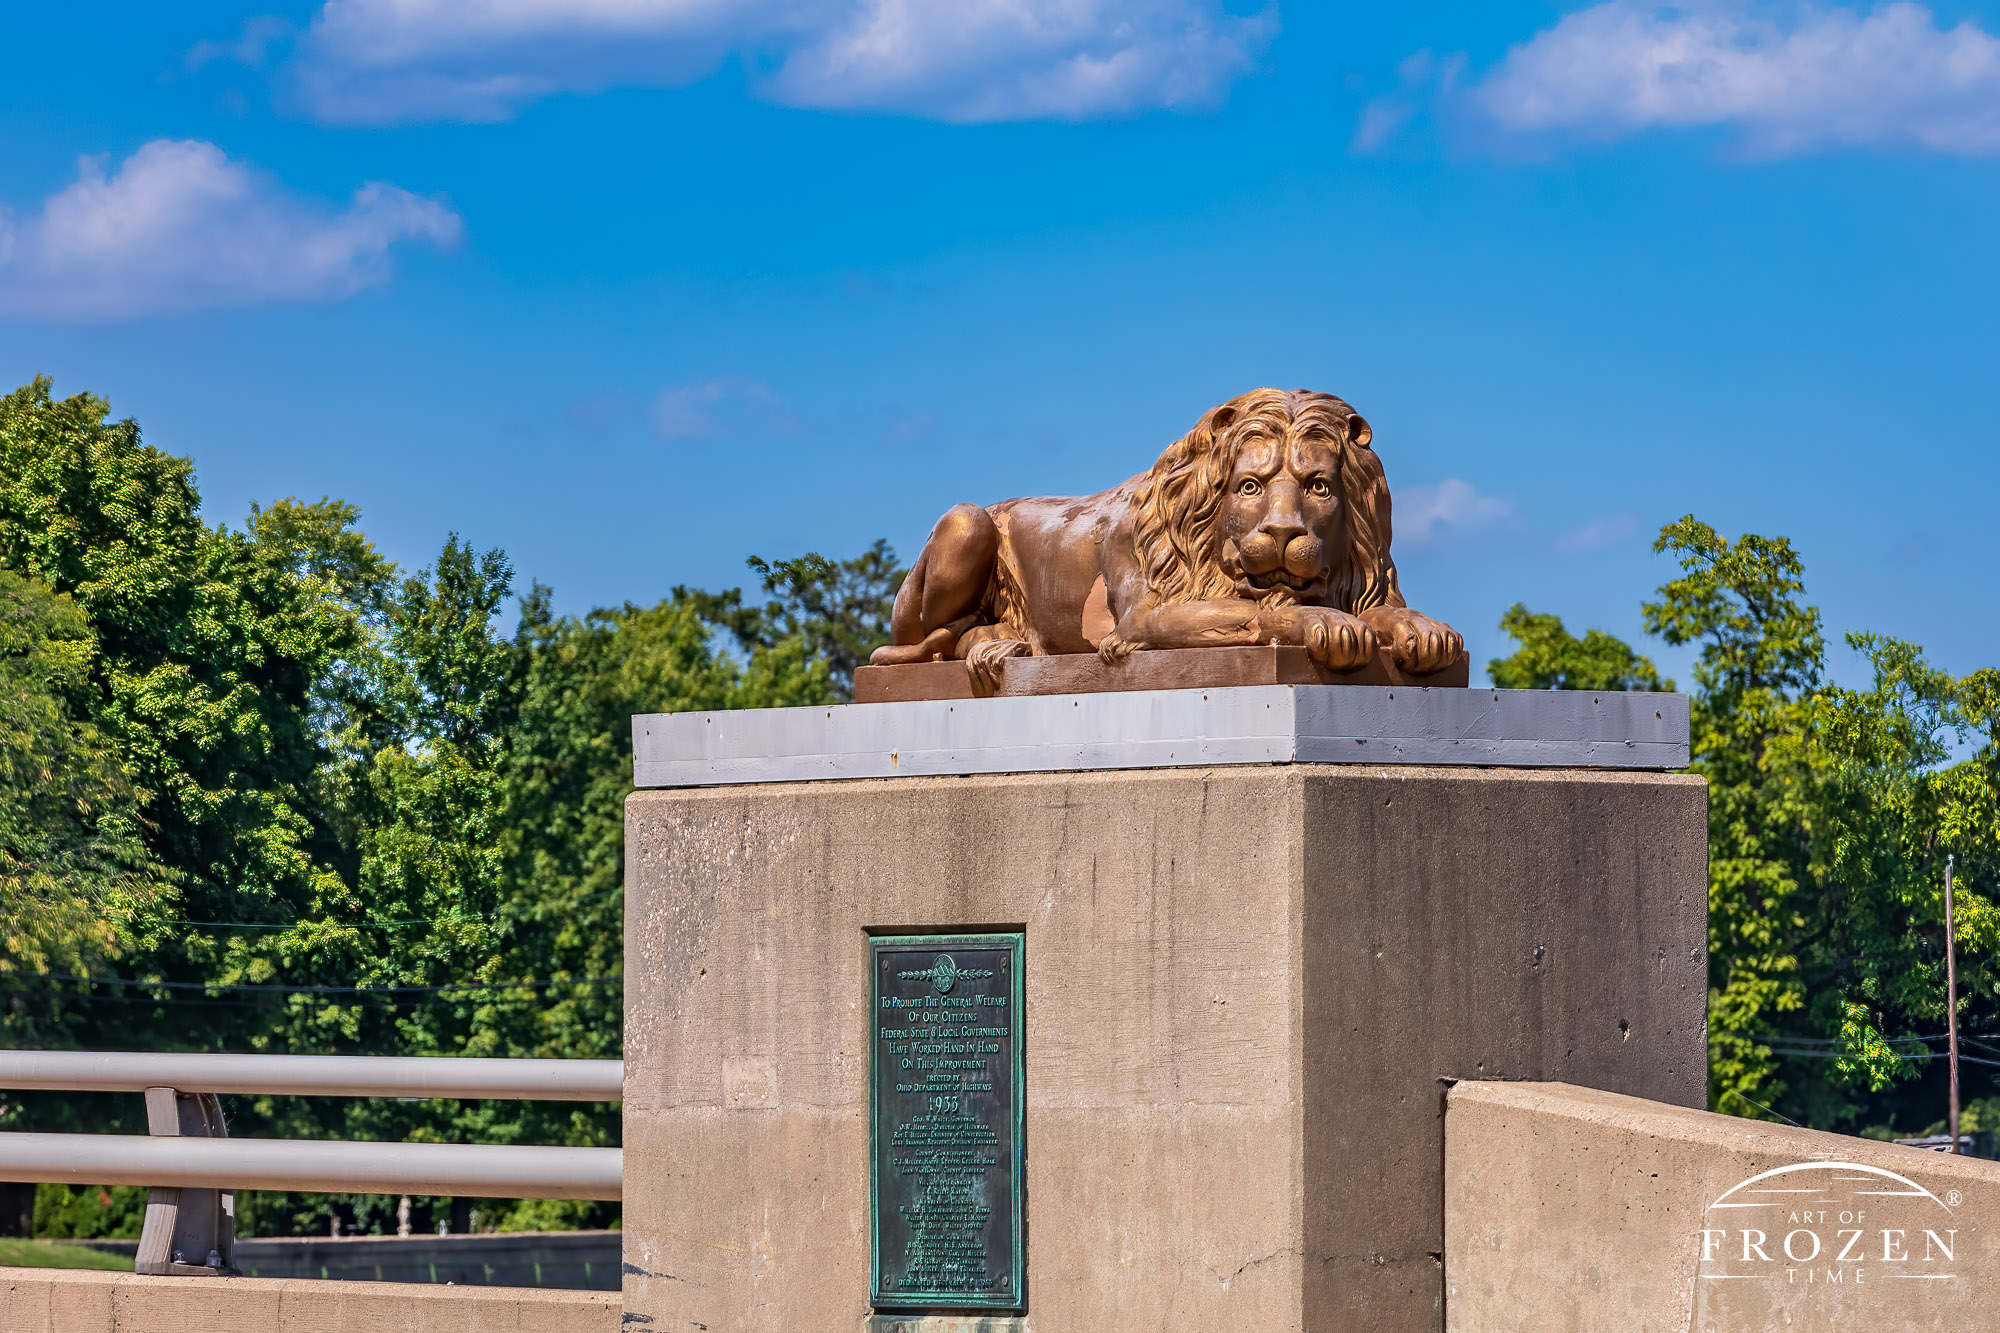 Cast iron lion from 1873 guards a local bridge in Franklin Ohio